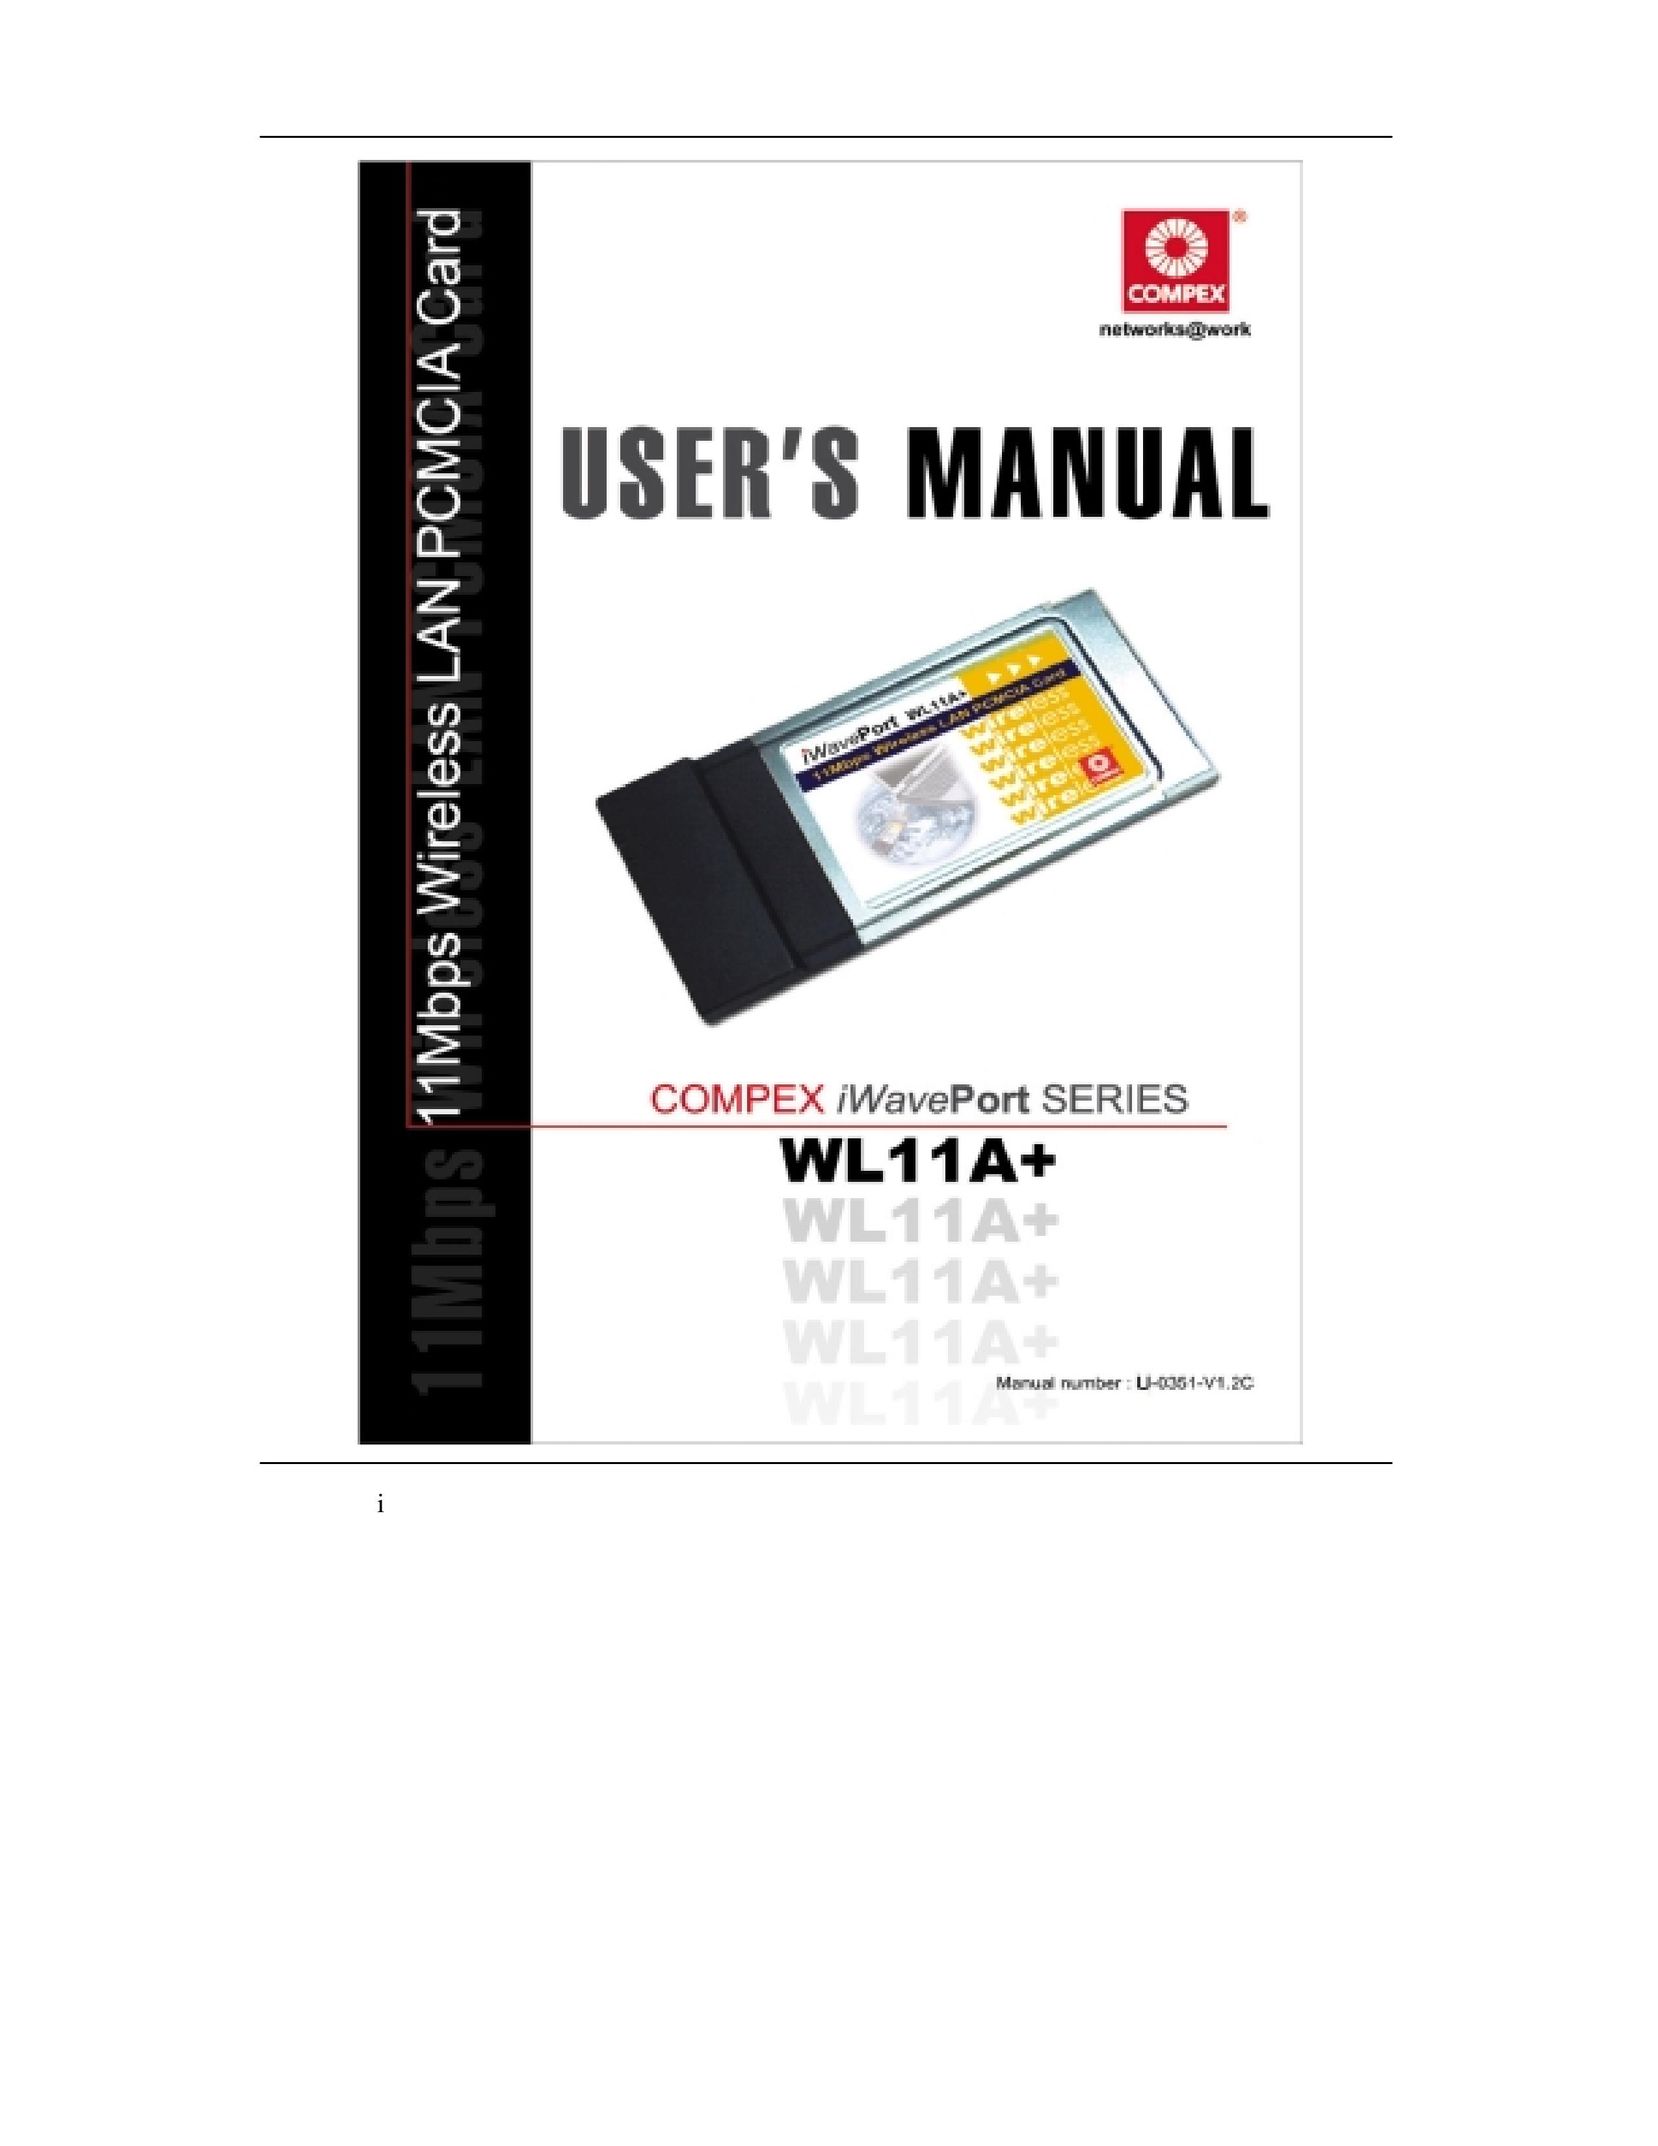 Compex Systems WL11A+ Network Card User Manual